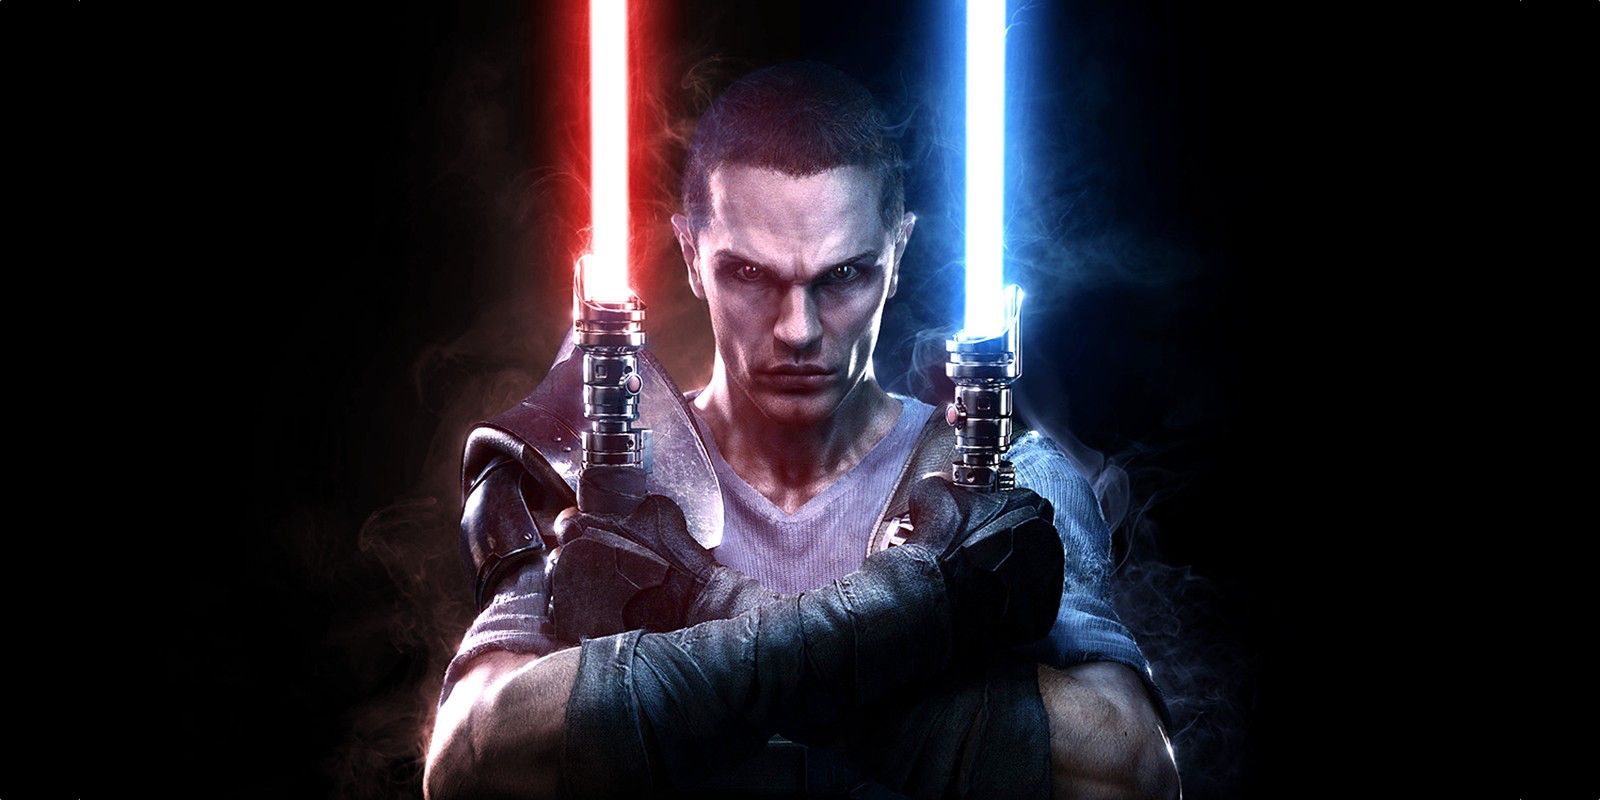 Star Wars Rebels Almost Included Starkiller from Force Unleashed